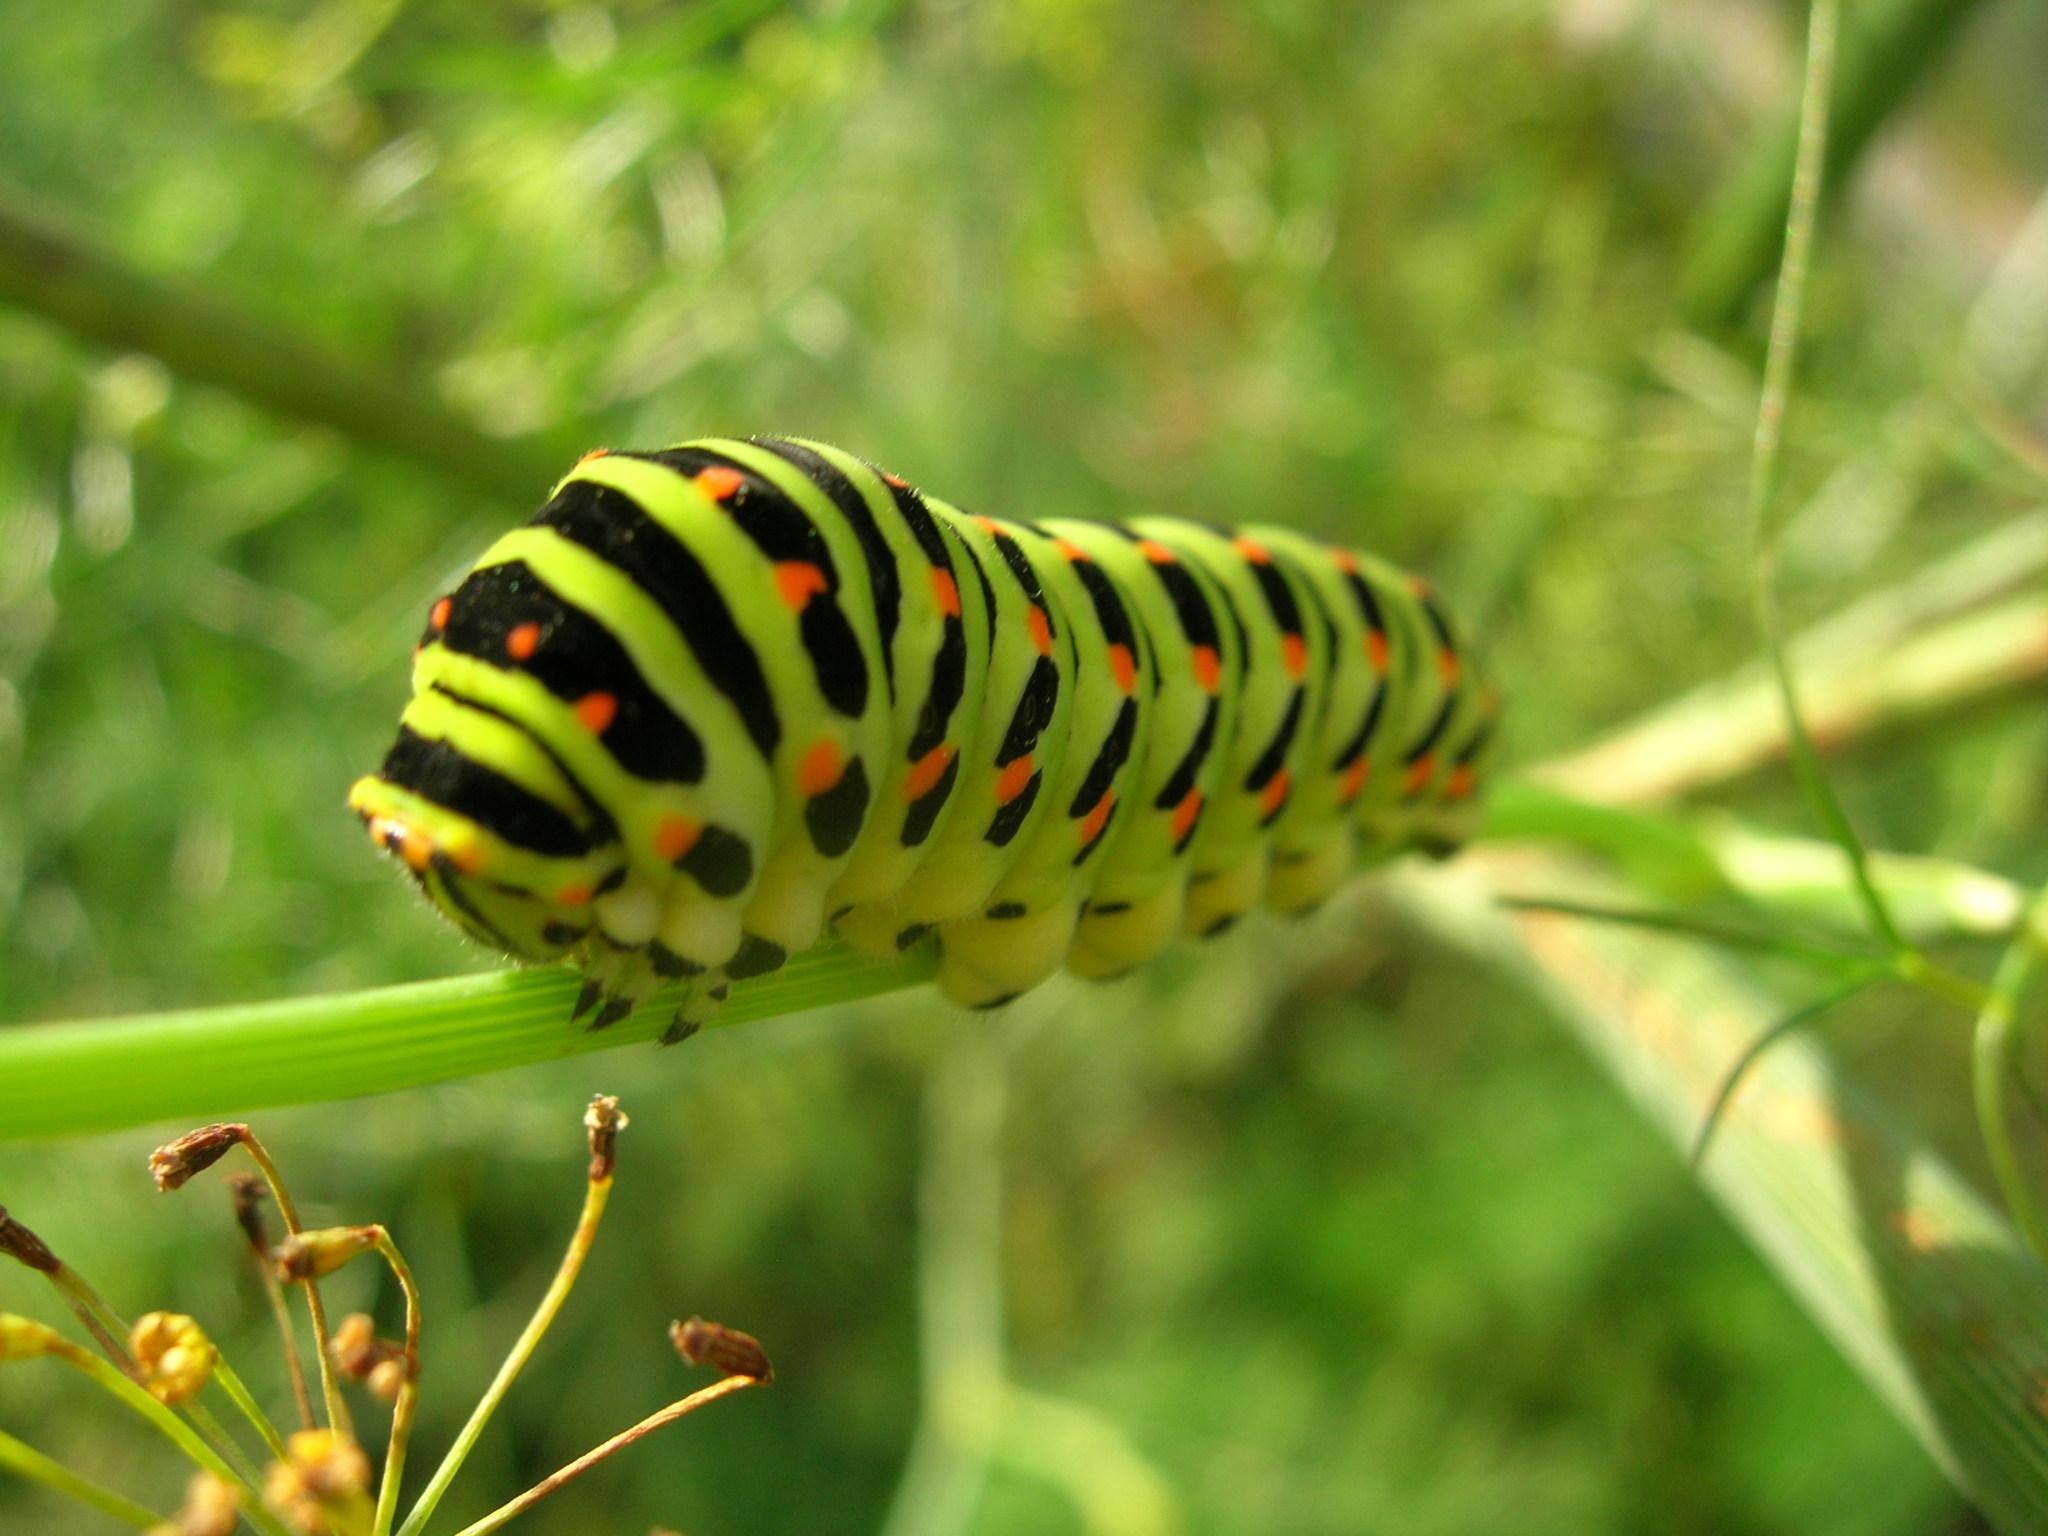 insects, Caterpillars, Bugs Wallpaper HD / Desktop and Mobile